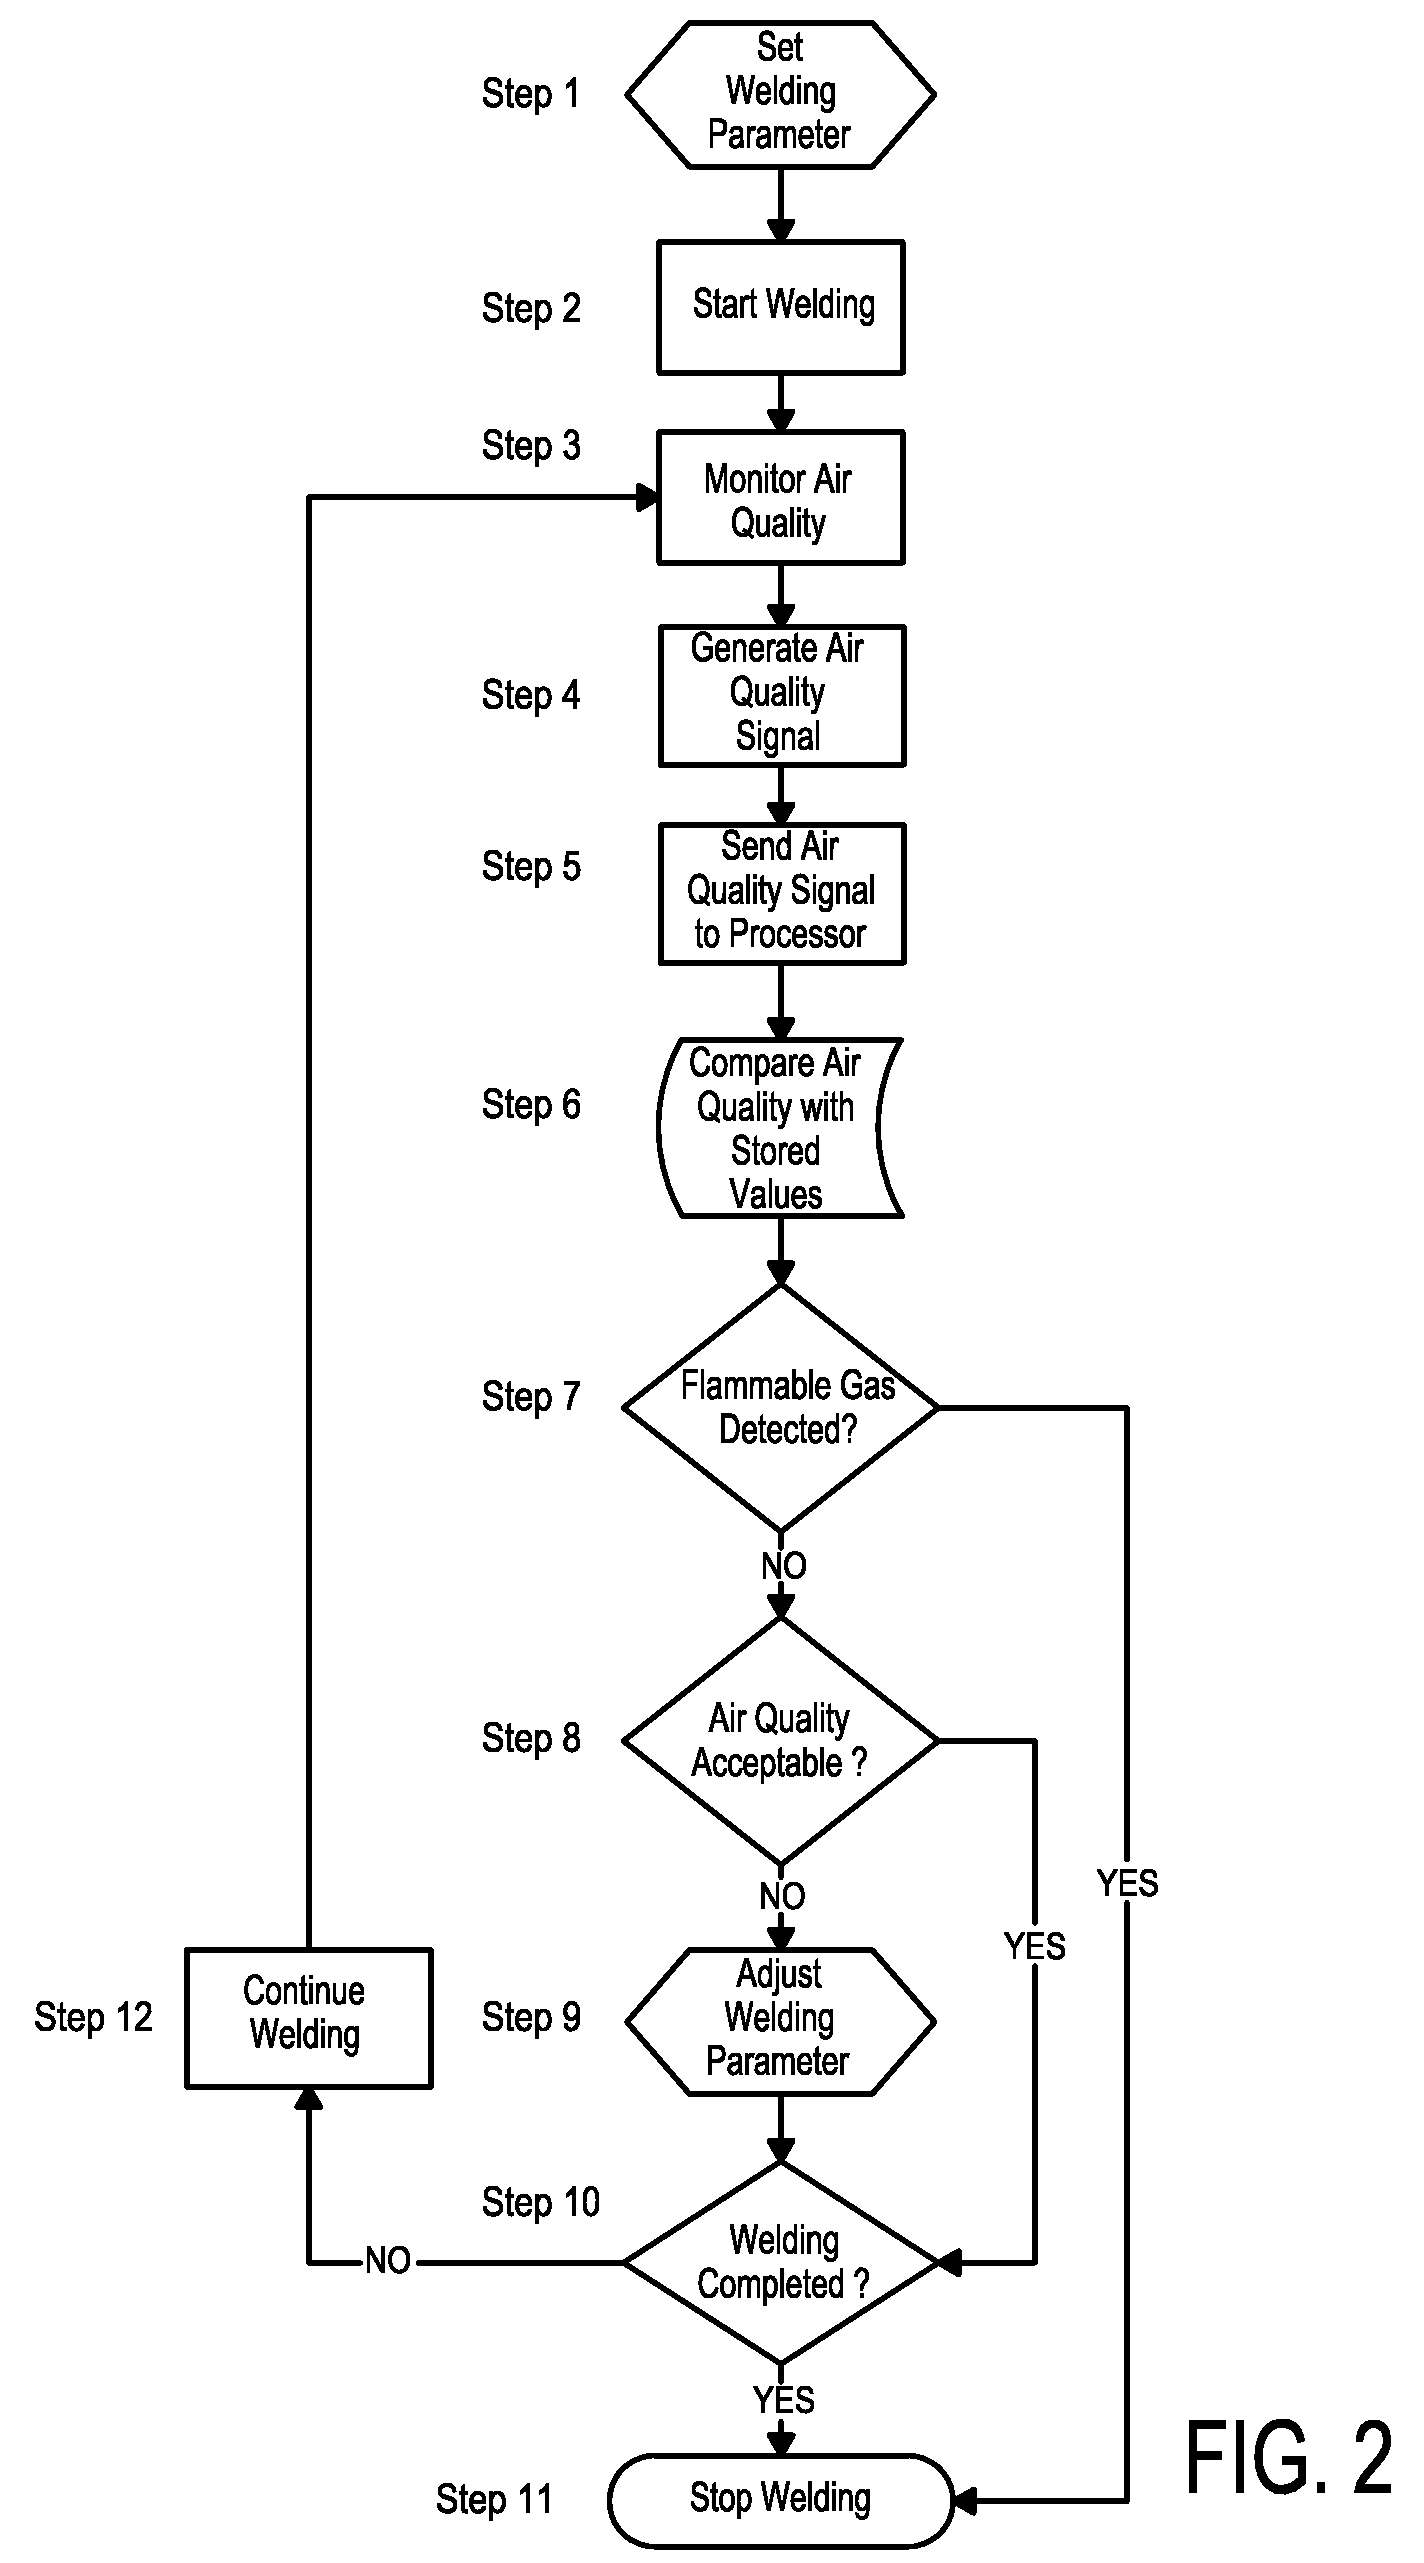 System for monitoring and controlling air quality during welding